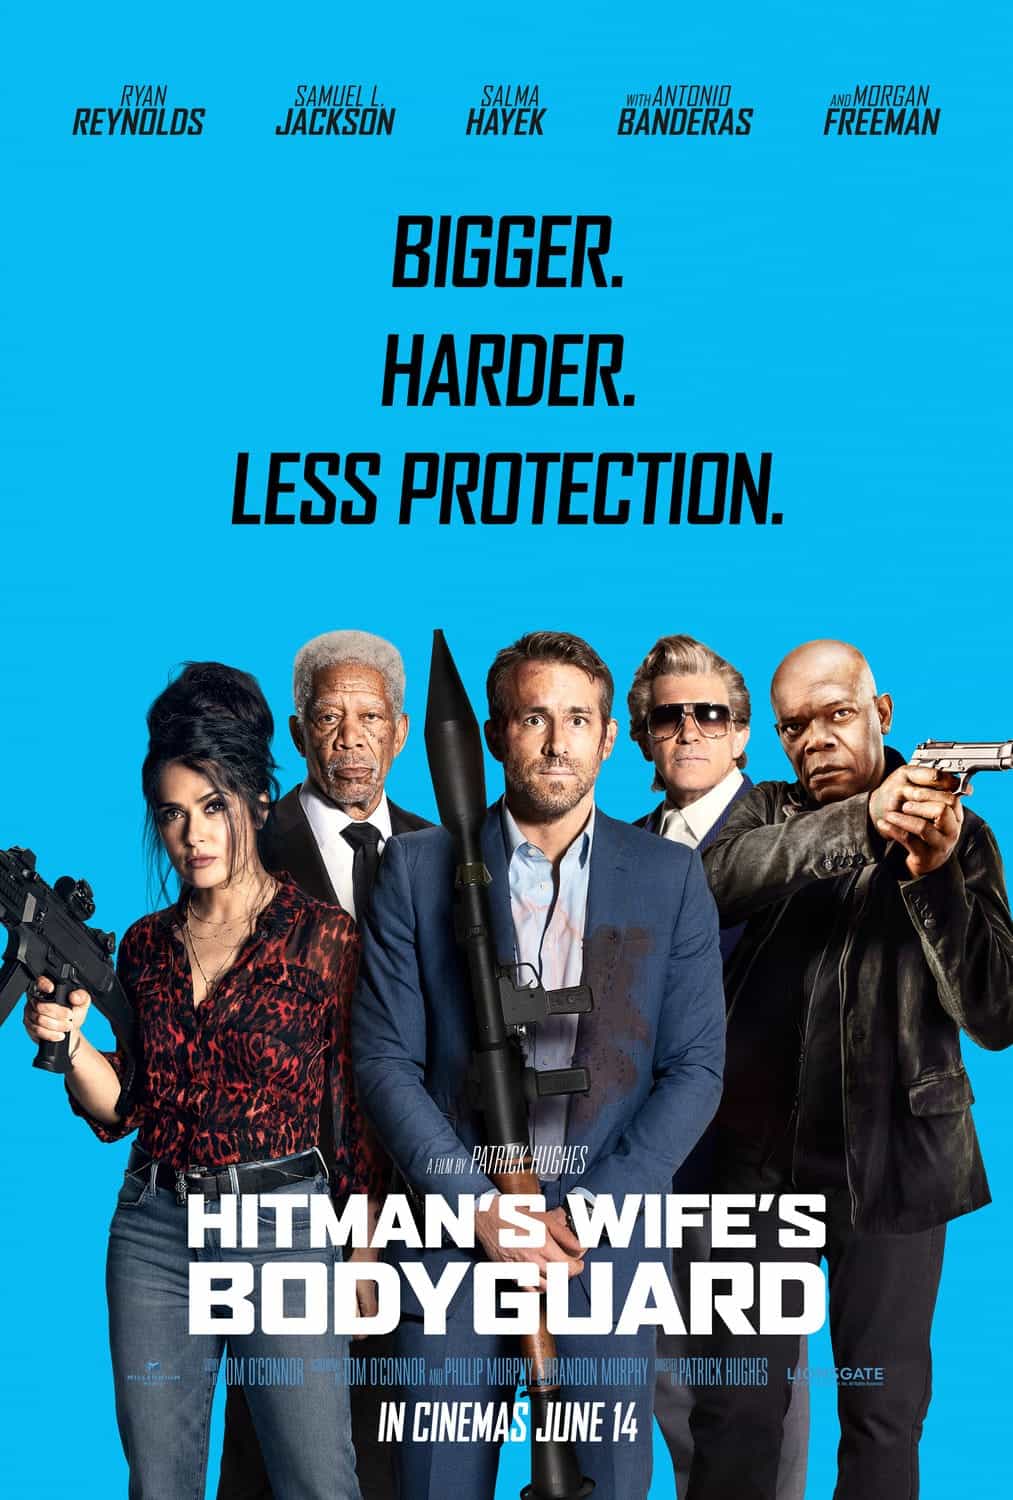 US Box Office Weekend Report 18th - 20th June 2021:  The Hitman